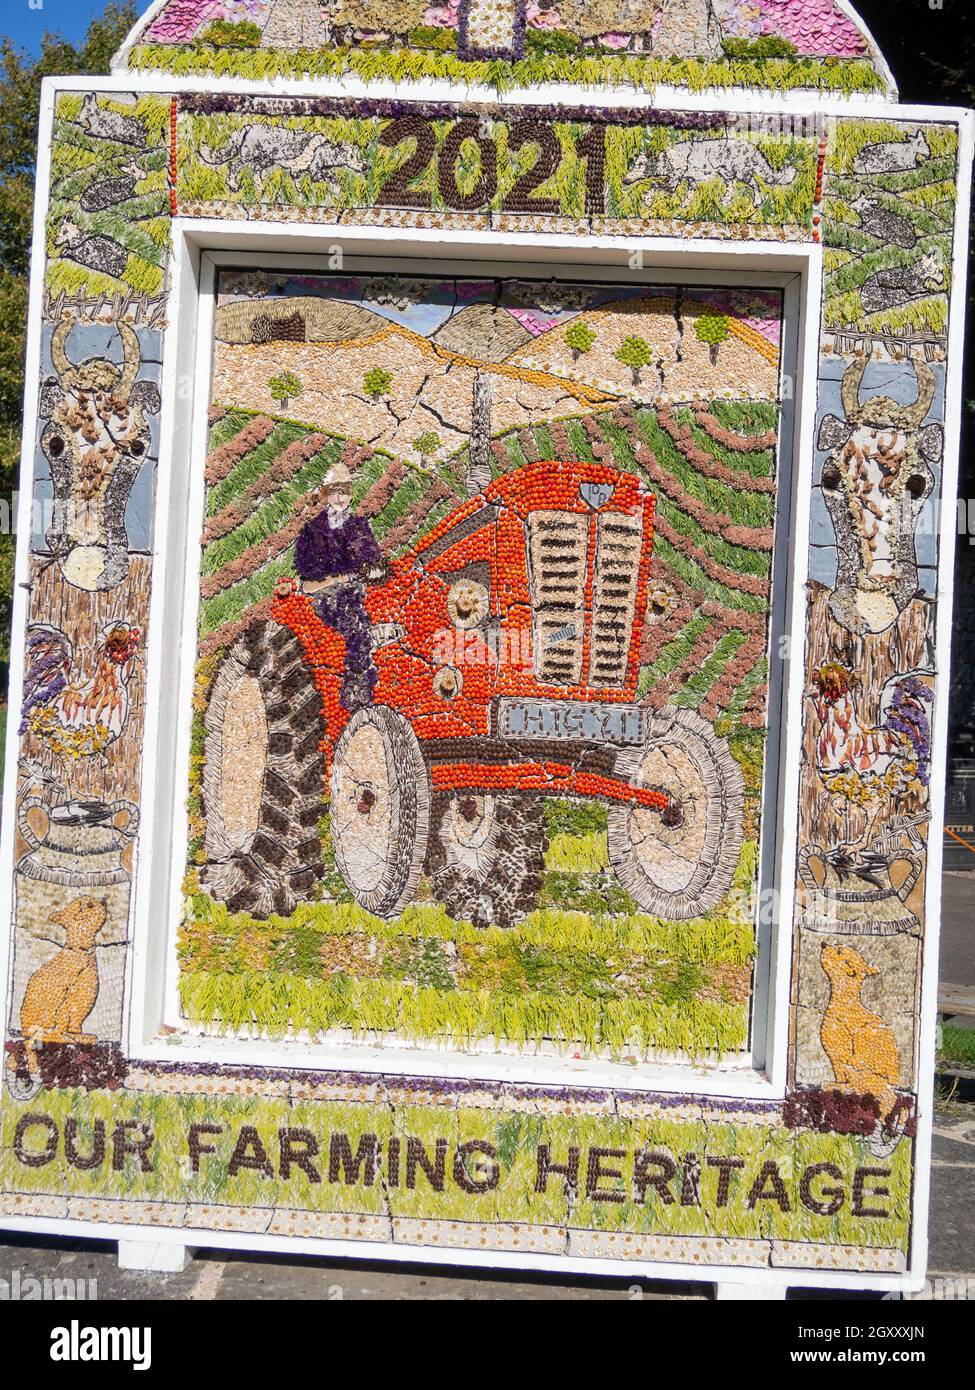 Colourful well dressing on the theme of our farming heritage, Hartington, Derbyshire, UK Stock Photo